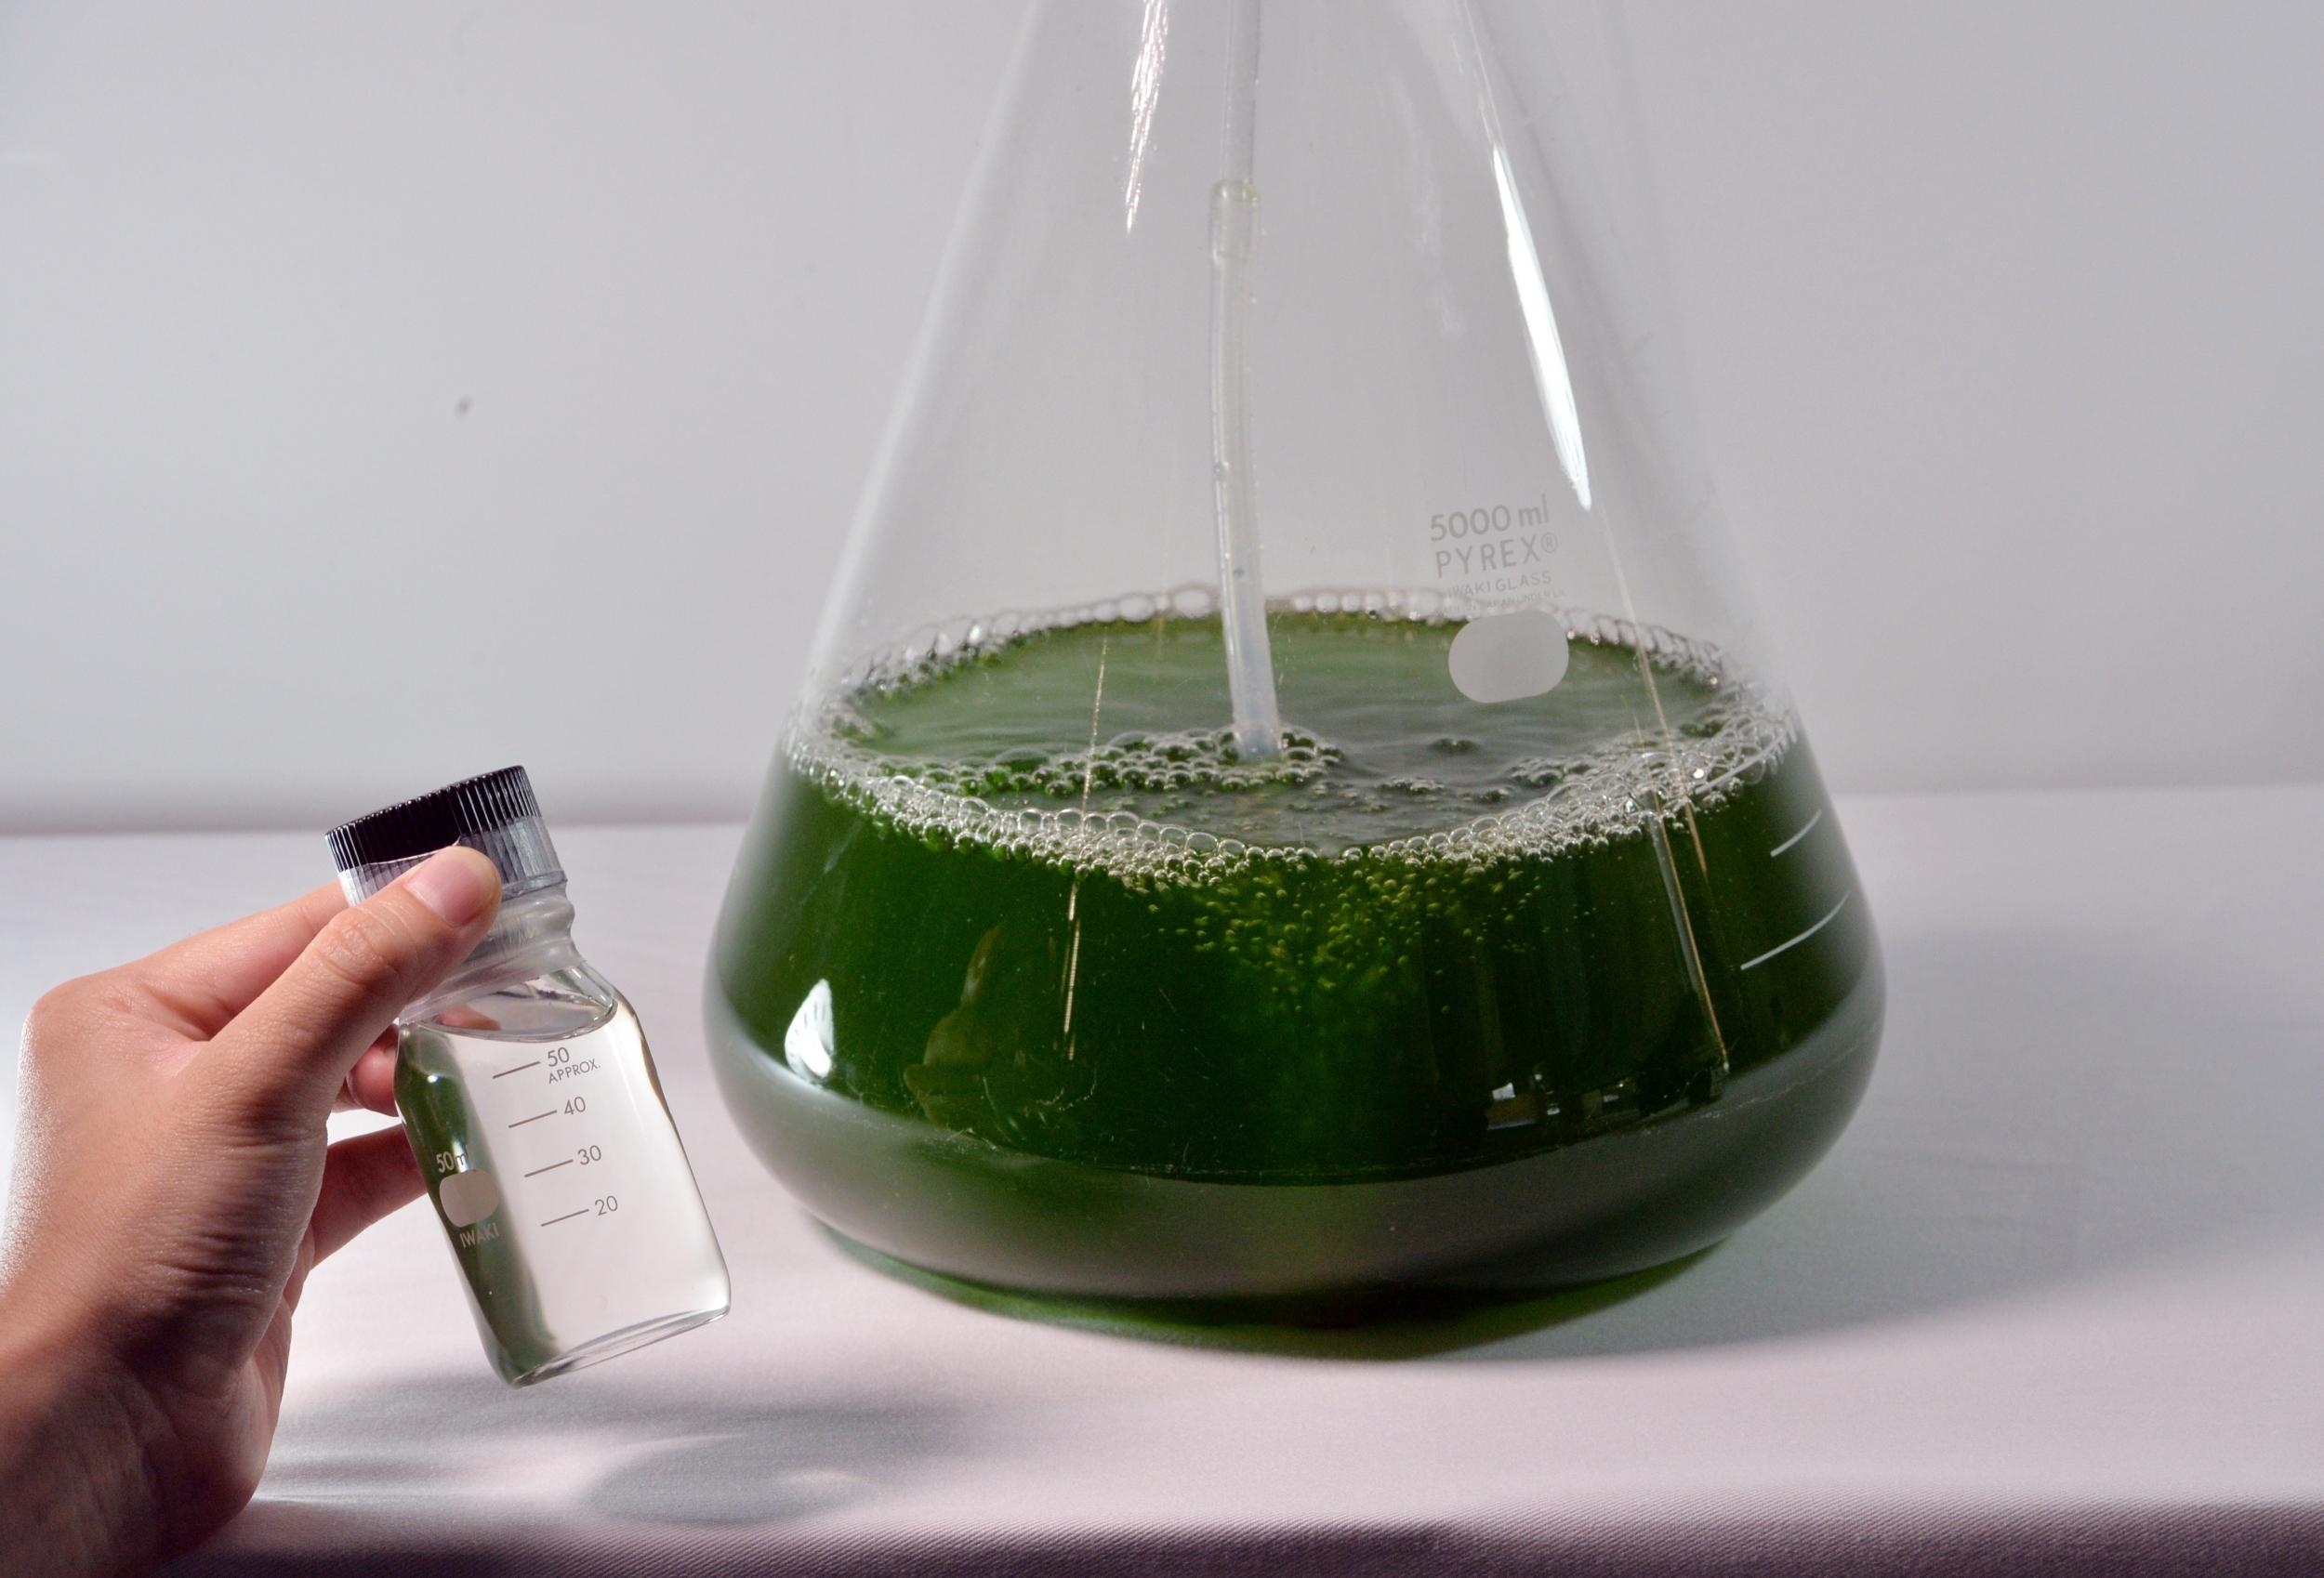 Algae biofuels could power jets and planes in the future